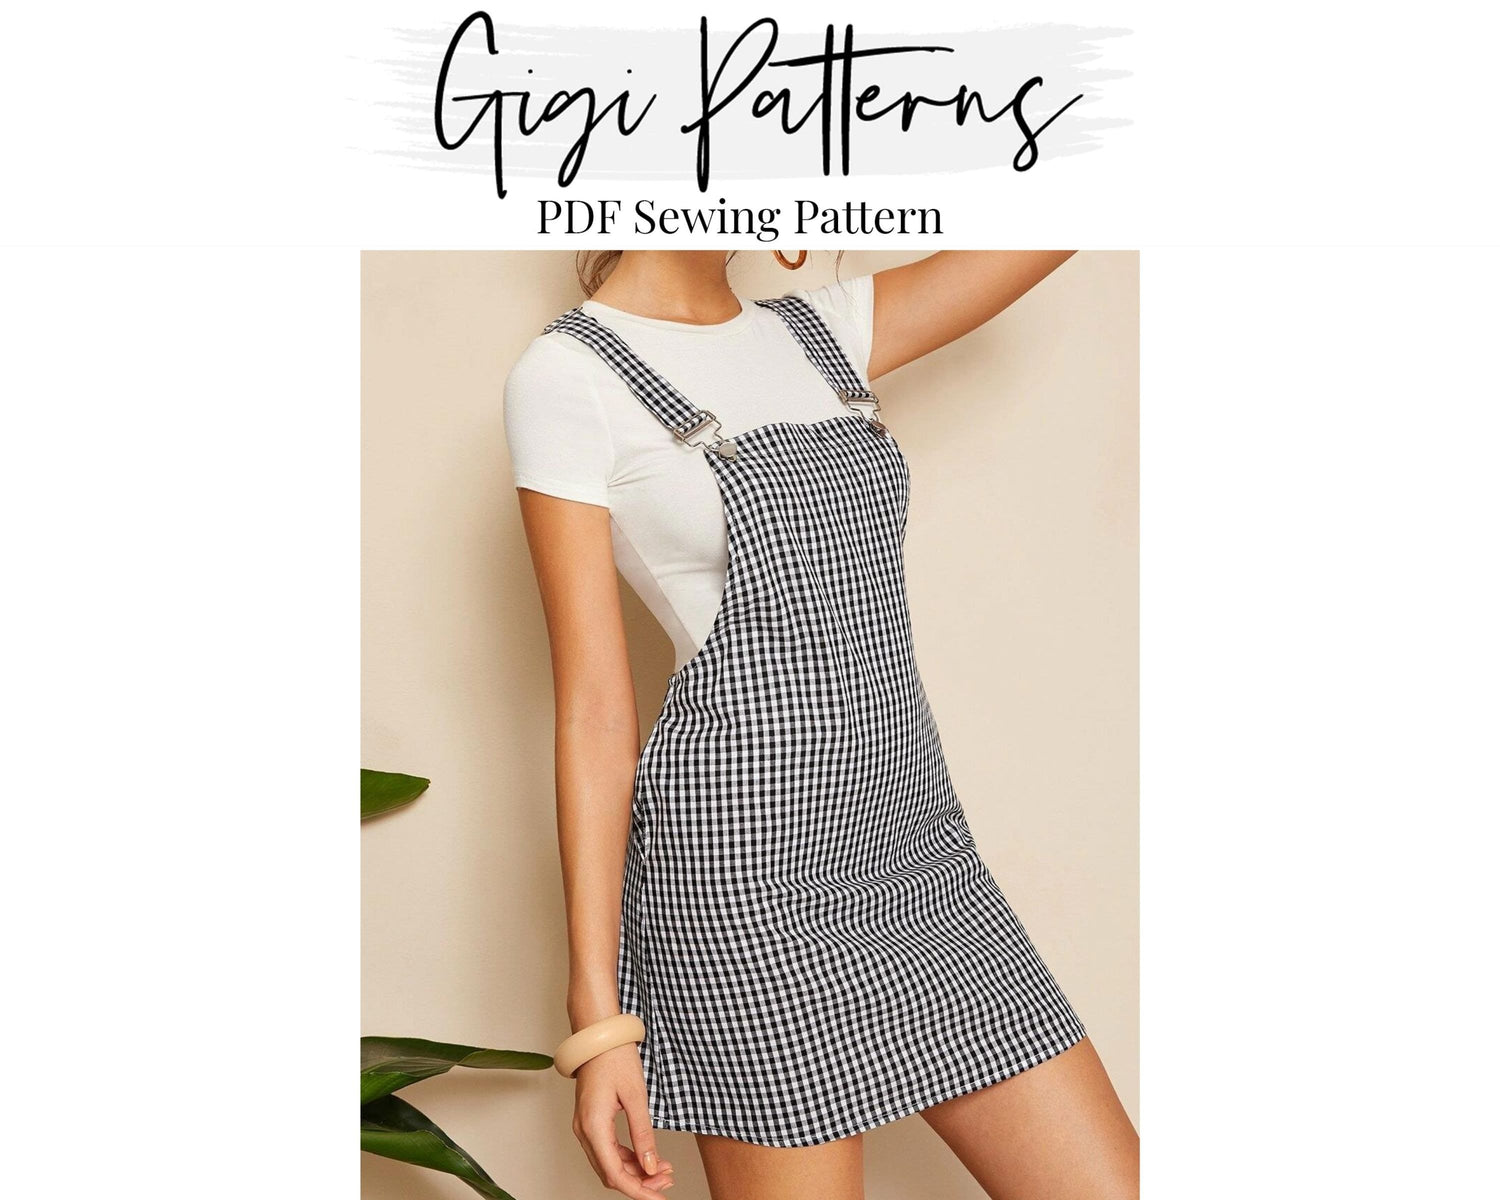 Pinafore Dress Sewing Pattern | summer dress pattern | Pinafore Dress Pattern Pdf | Woman Pinafore Sewing Pattern | Instant Download